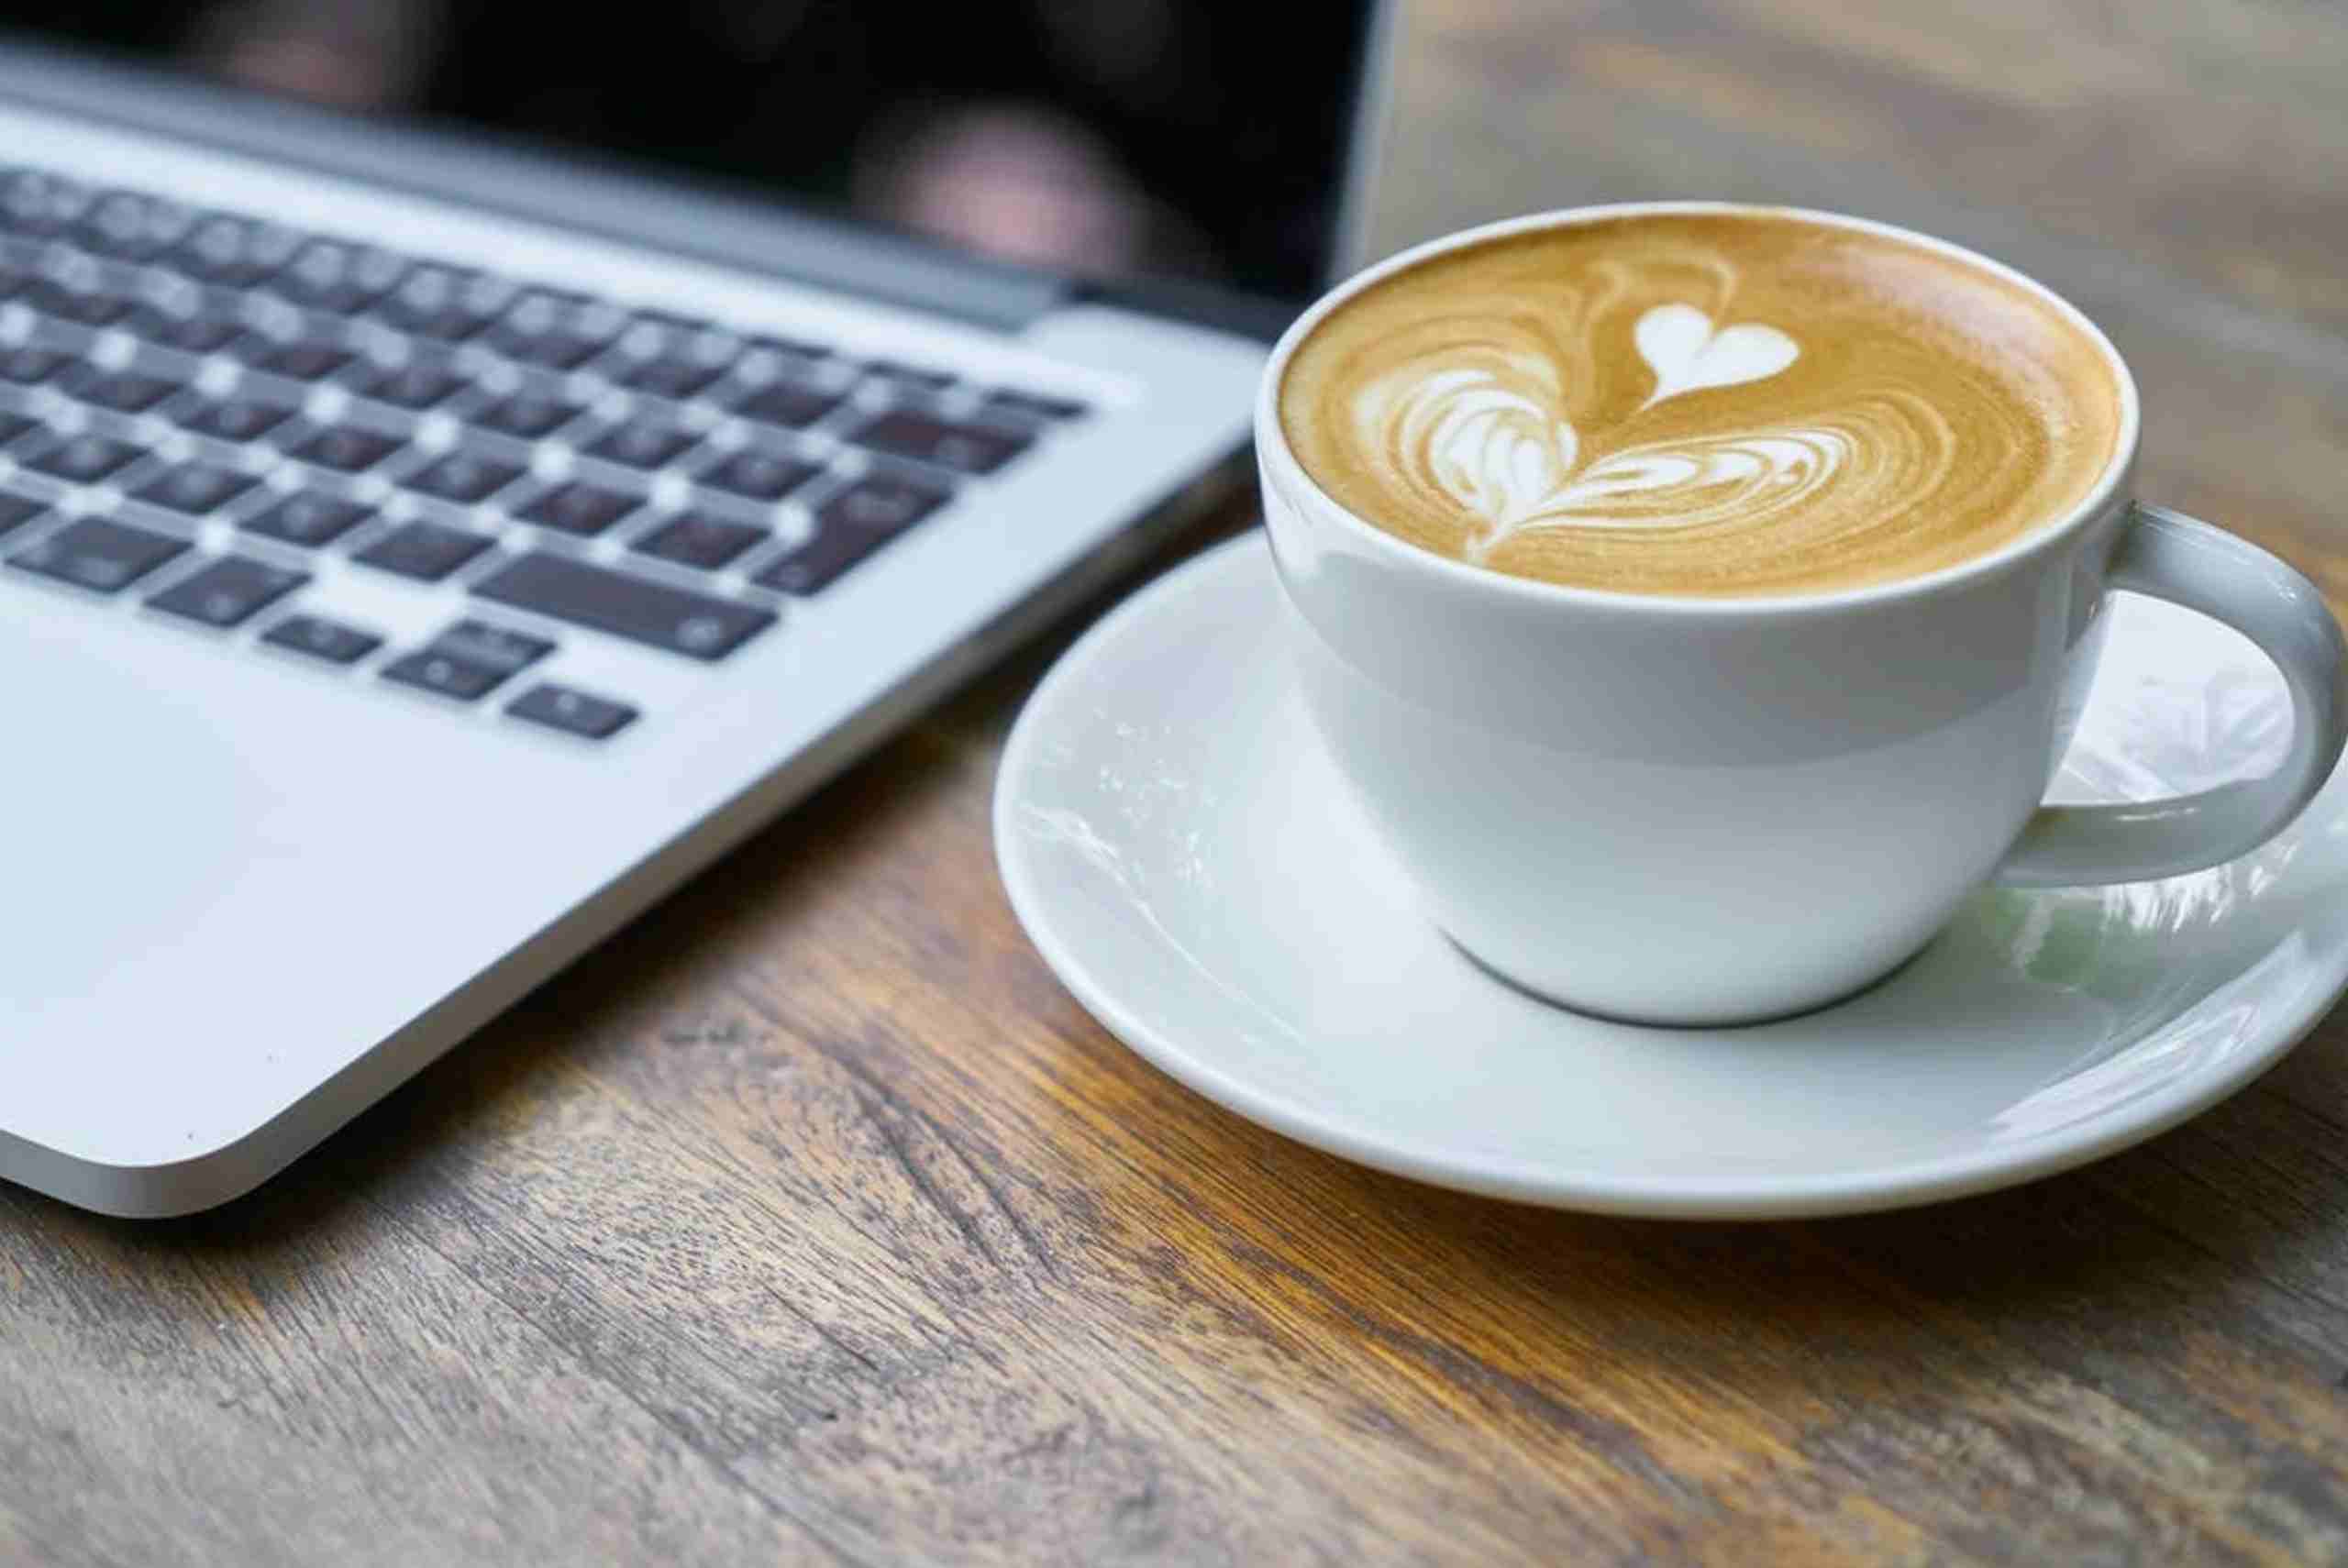 a latte and laptop